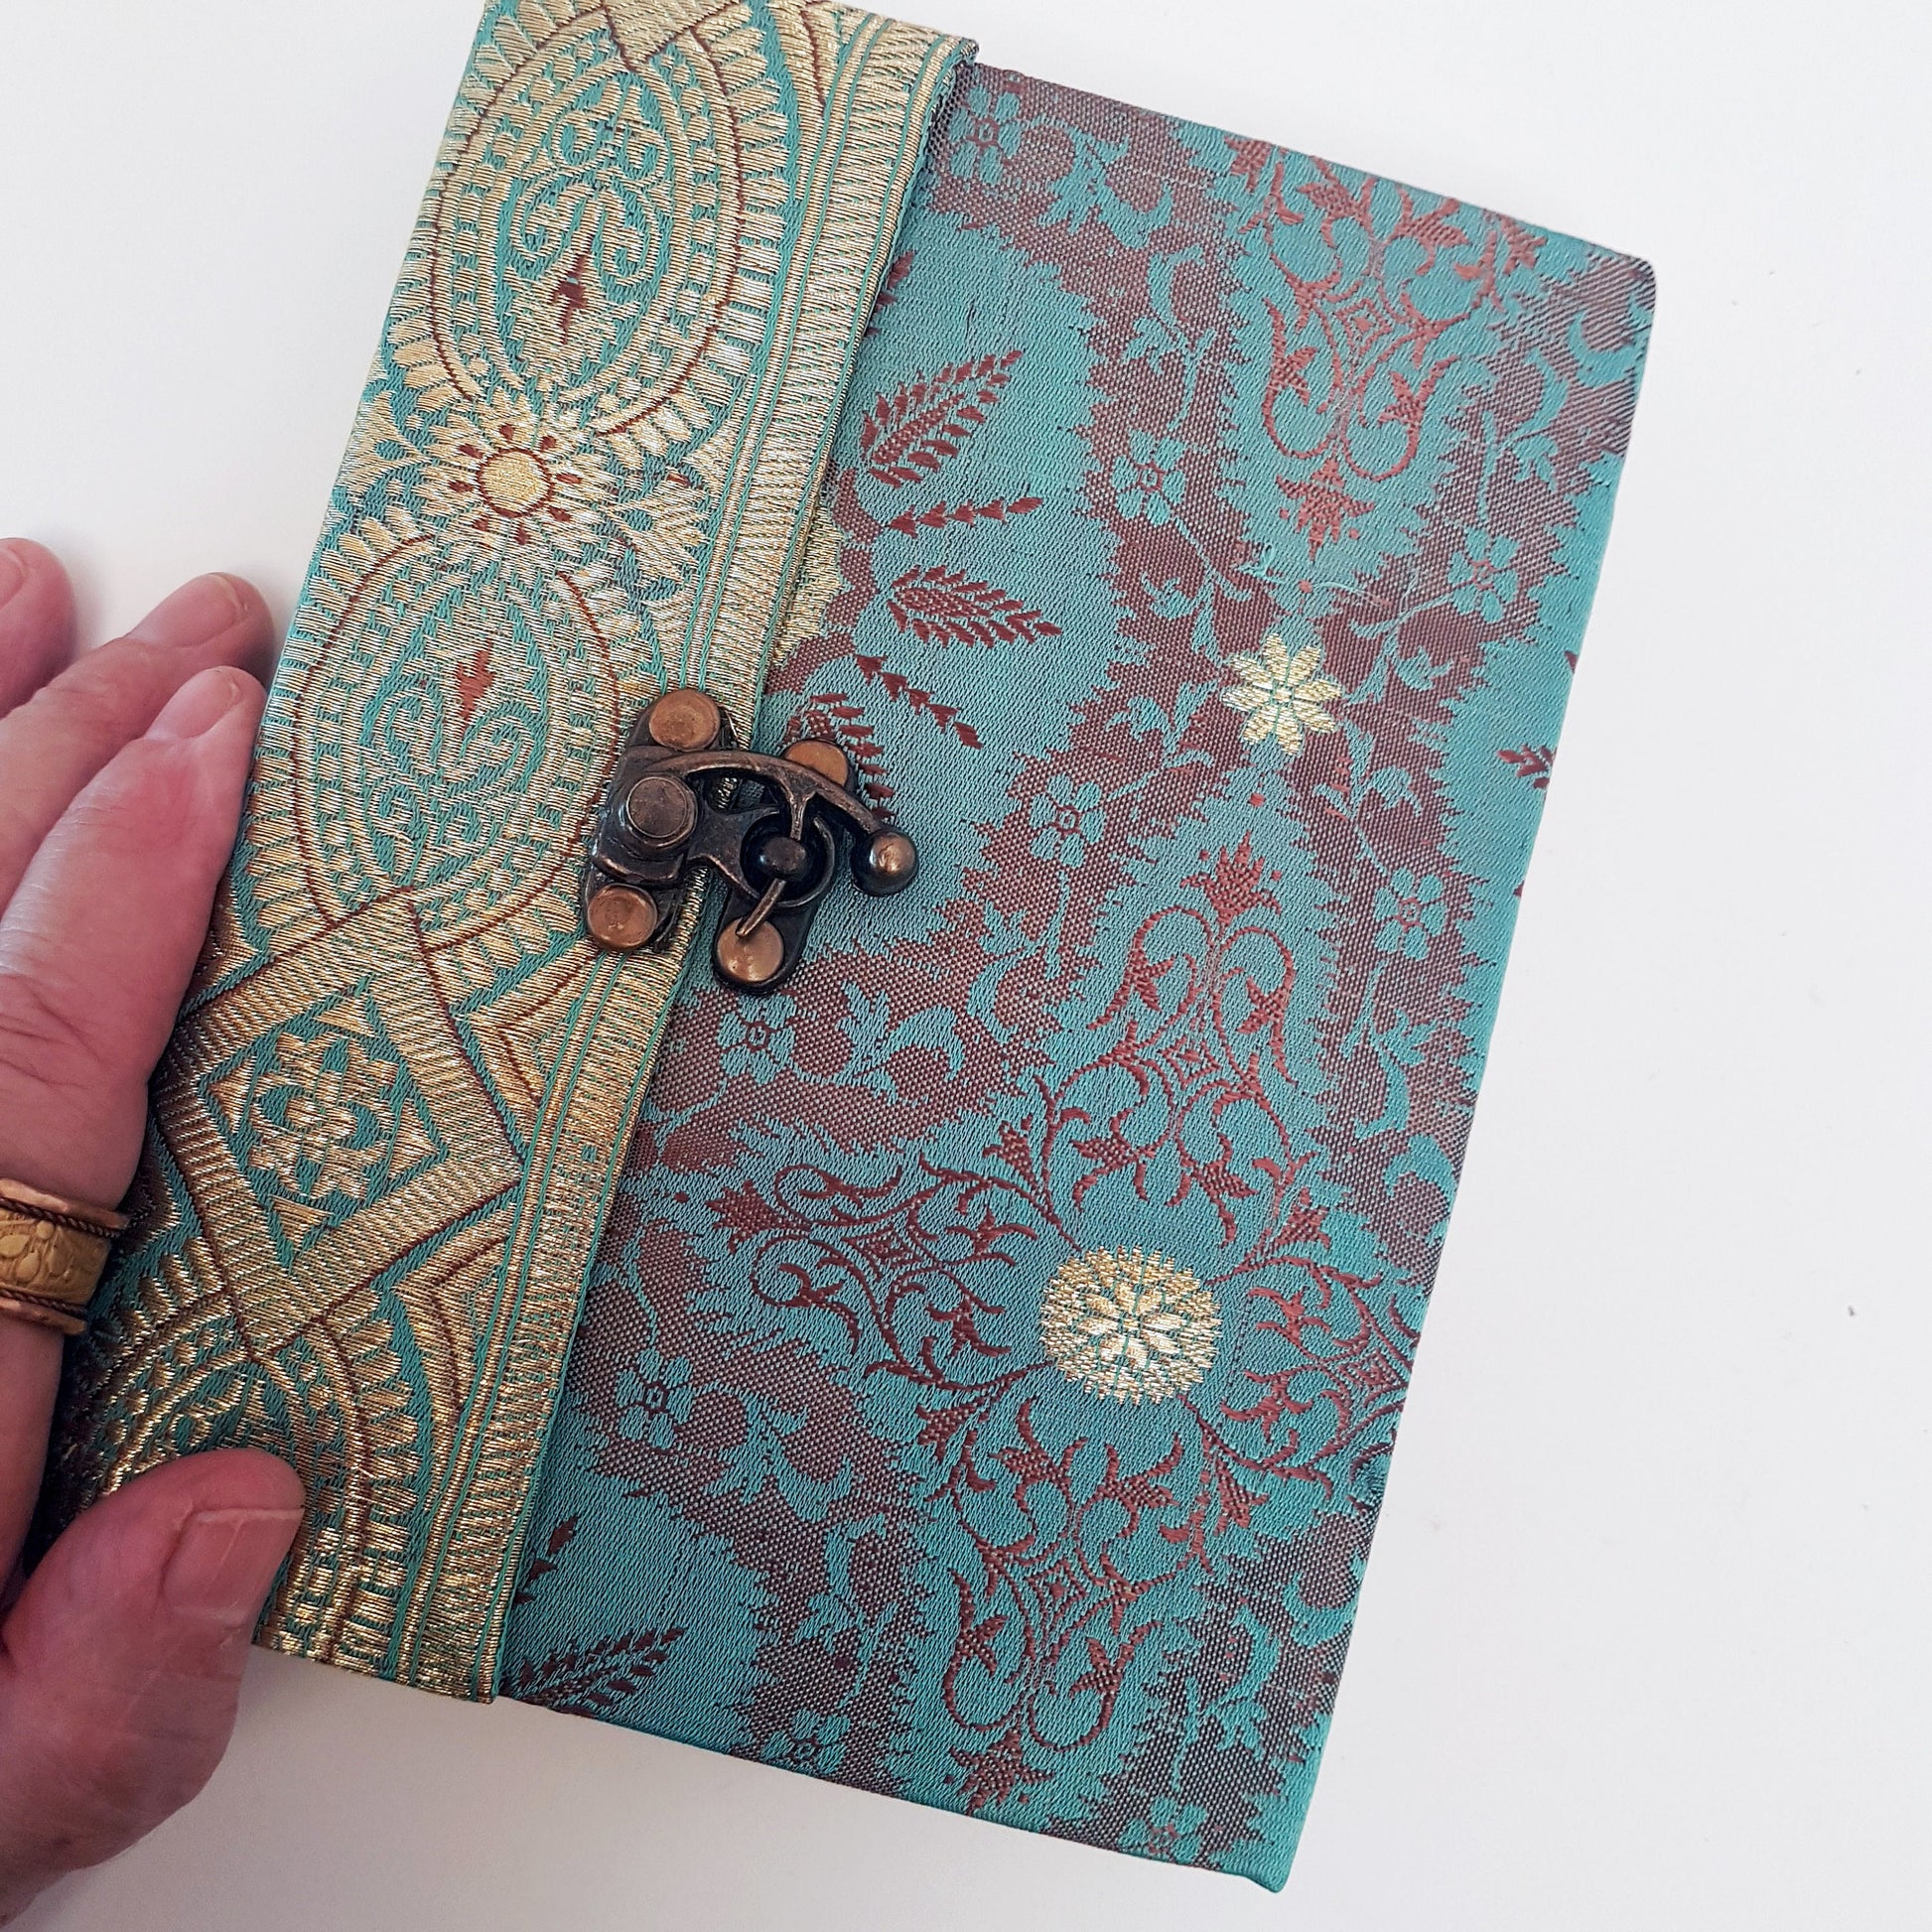 Vintage fabric sketchbook journal 5 by 7 inches. One of a kind blank book with artisan paper pages. Medieval look bronze metal lock closure. - Vintage India Ca